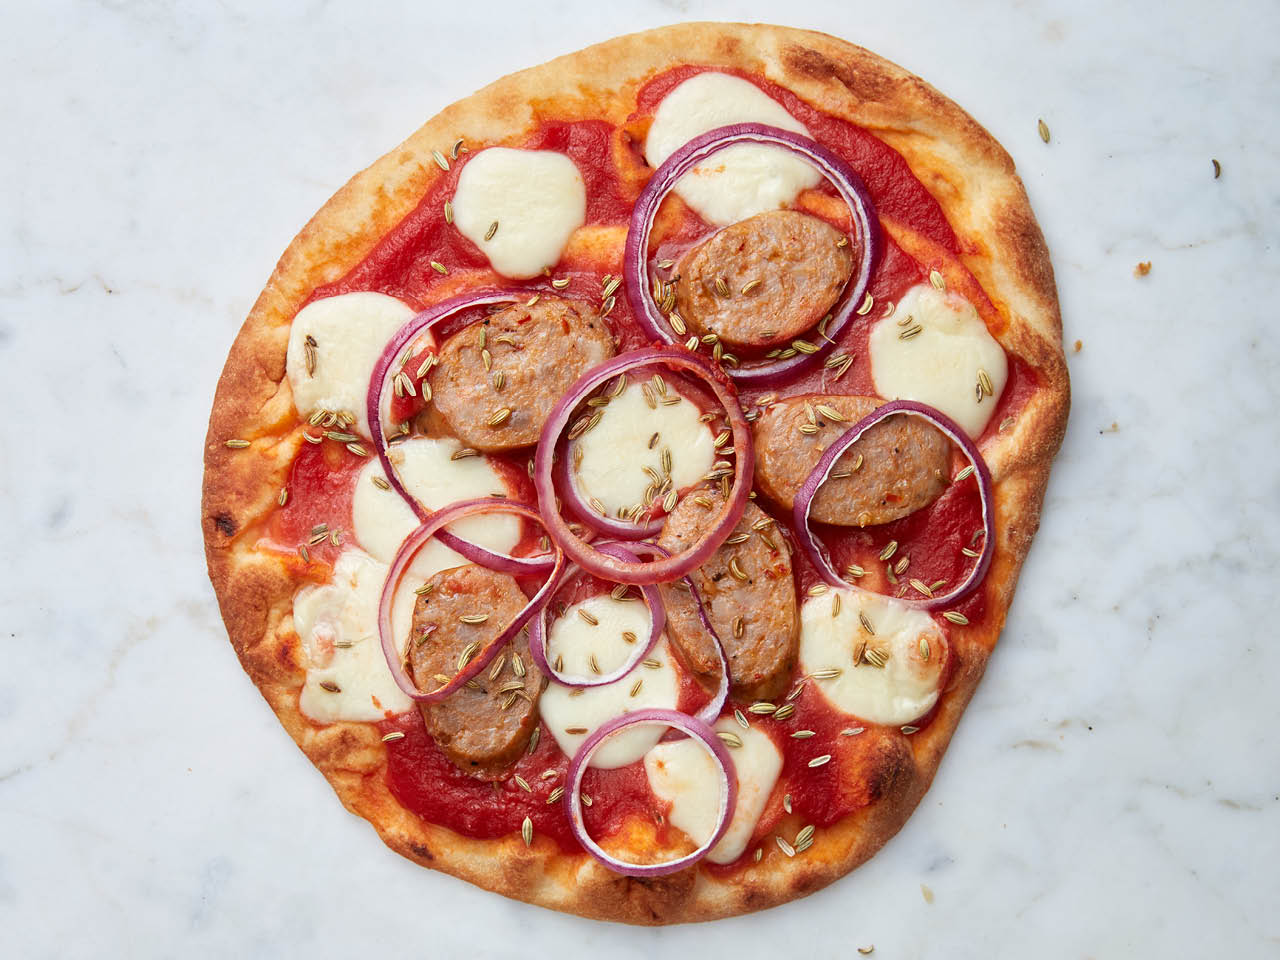 Fennel and sausage pizza